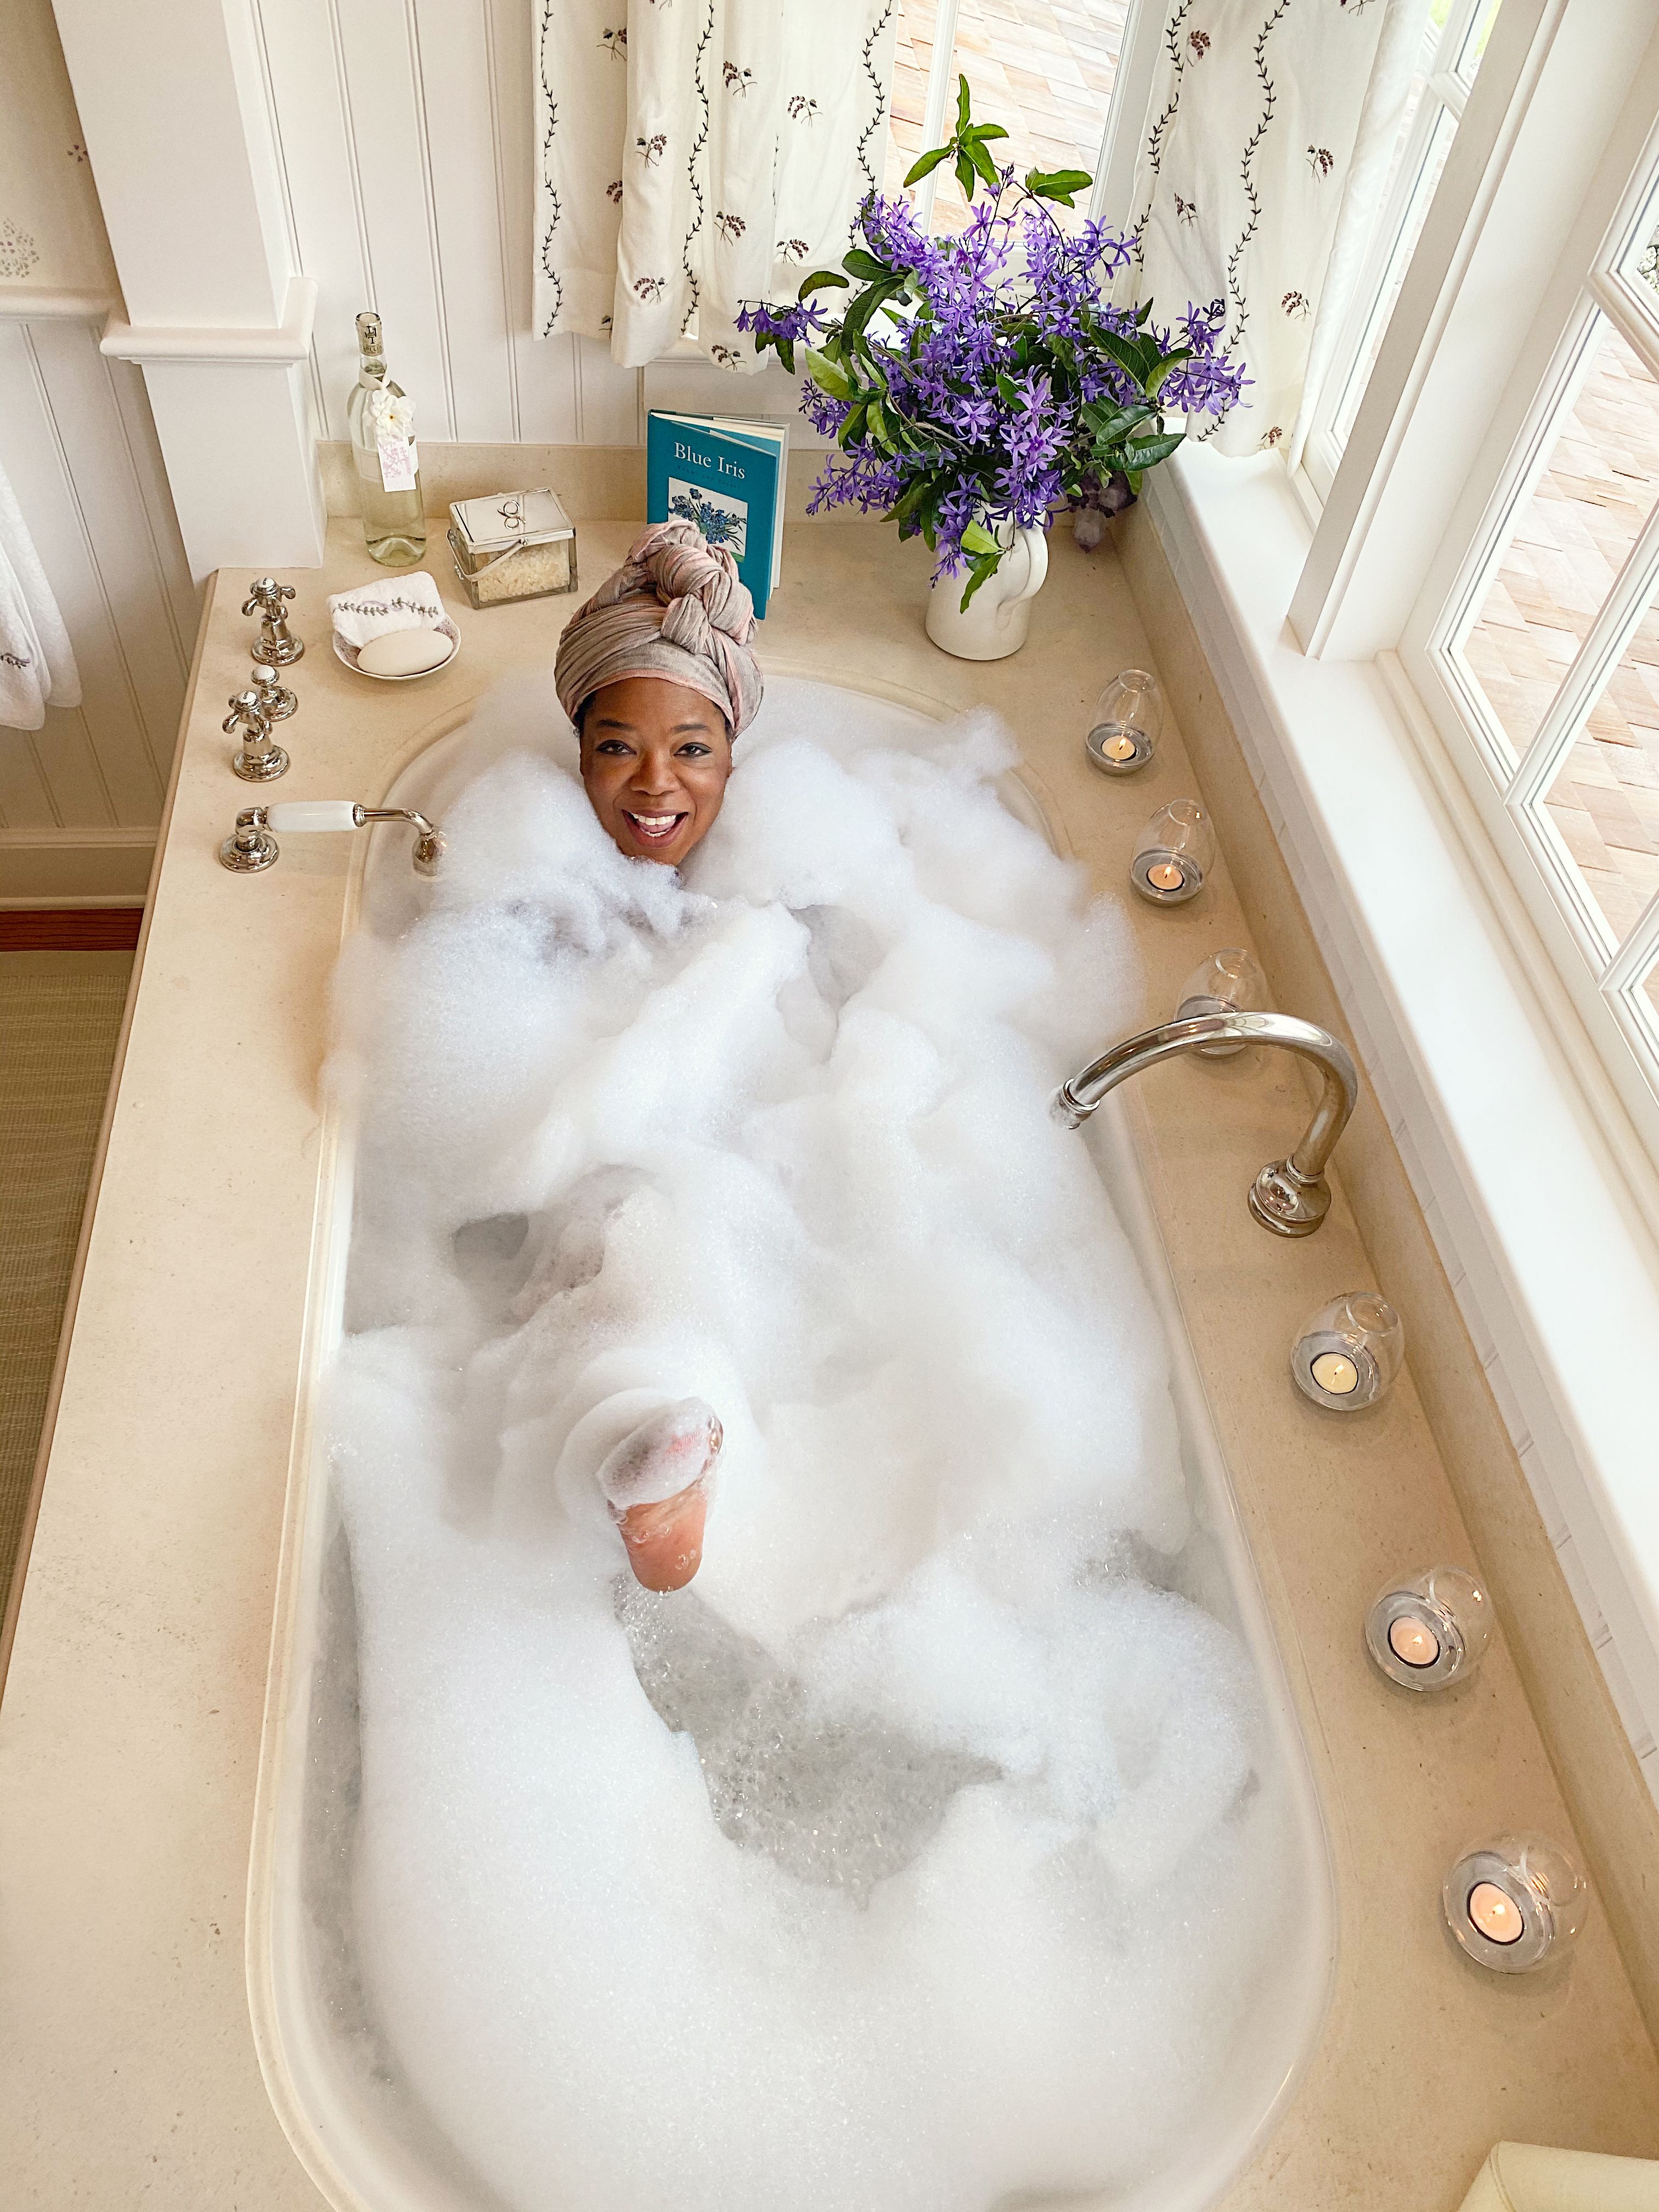 Oprah Reveals Her Bath Routine In, Tea For Two Bathtub Review